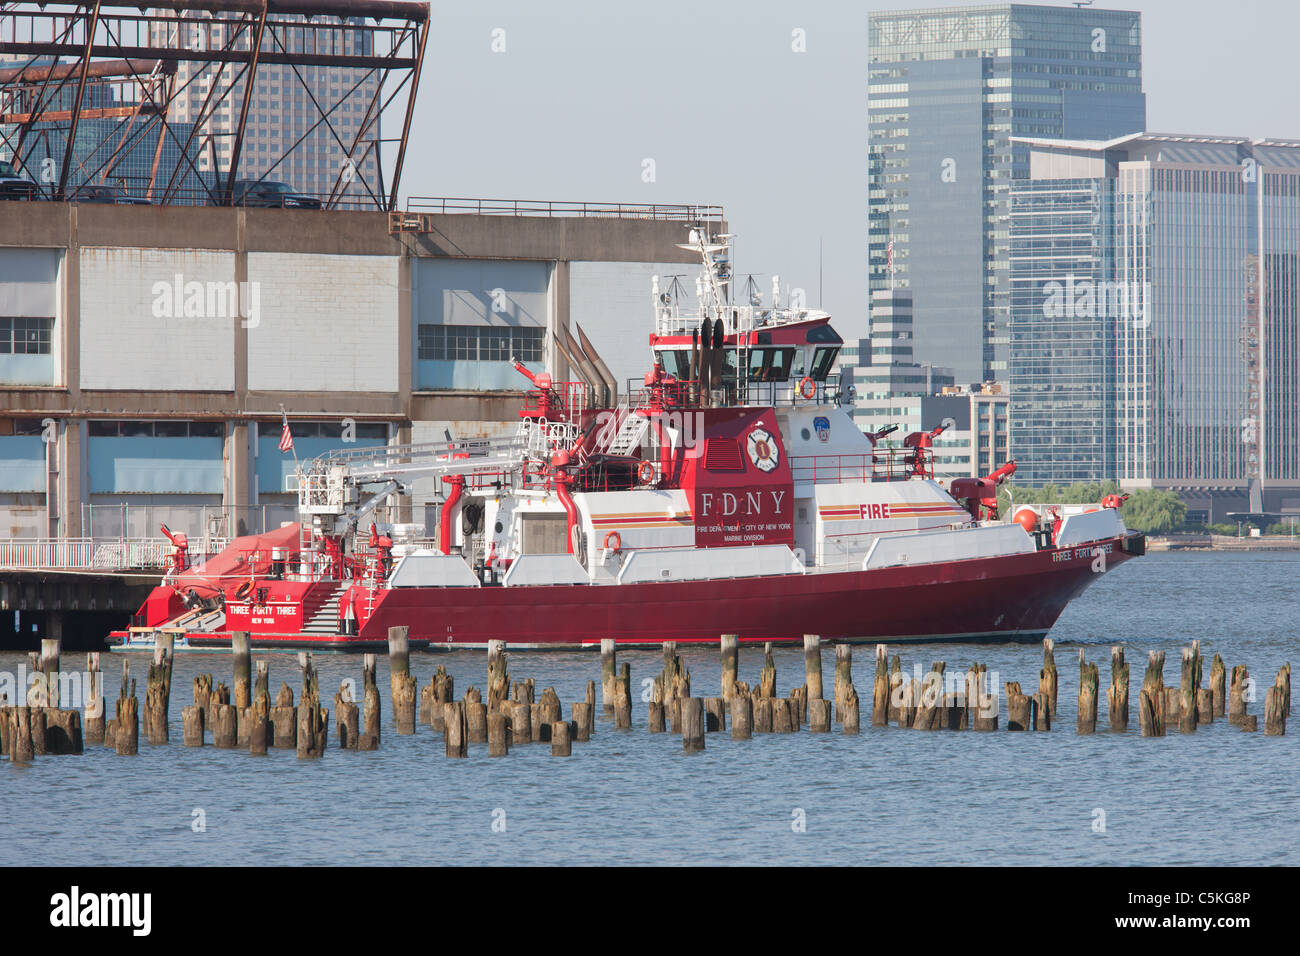 FDNY Marine 1 fire boat 'Three Forty Three' docked in its berth at Pier 40 on the Hudson River. Stock Photo